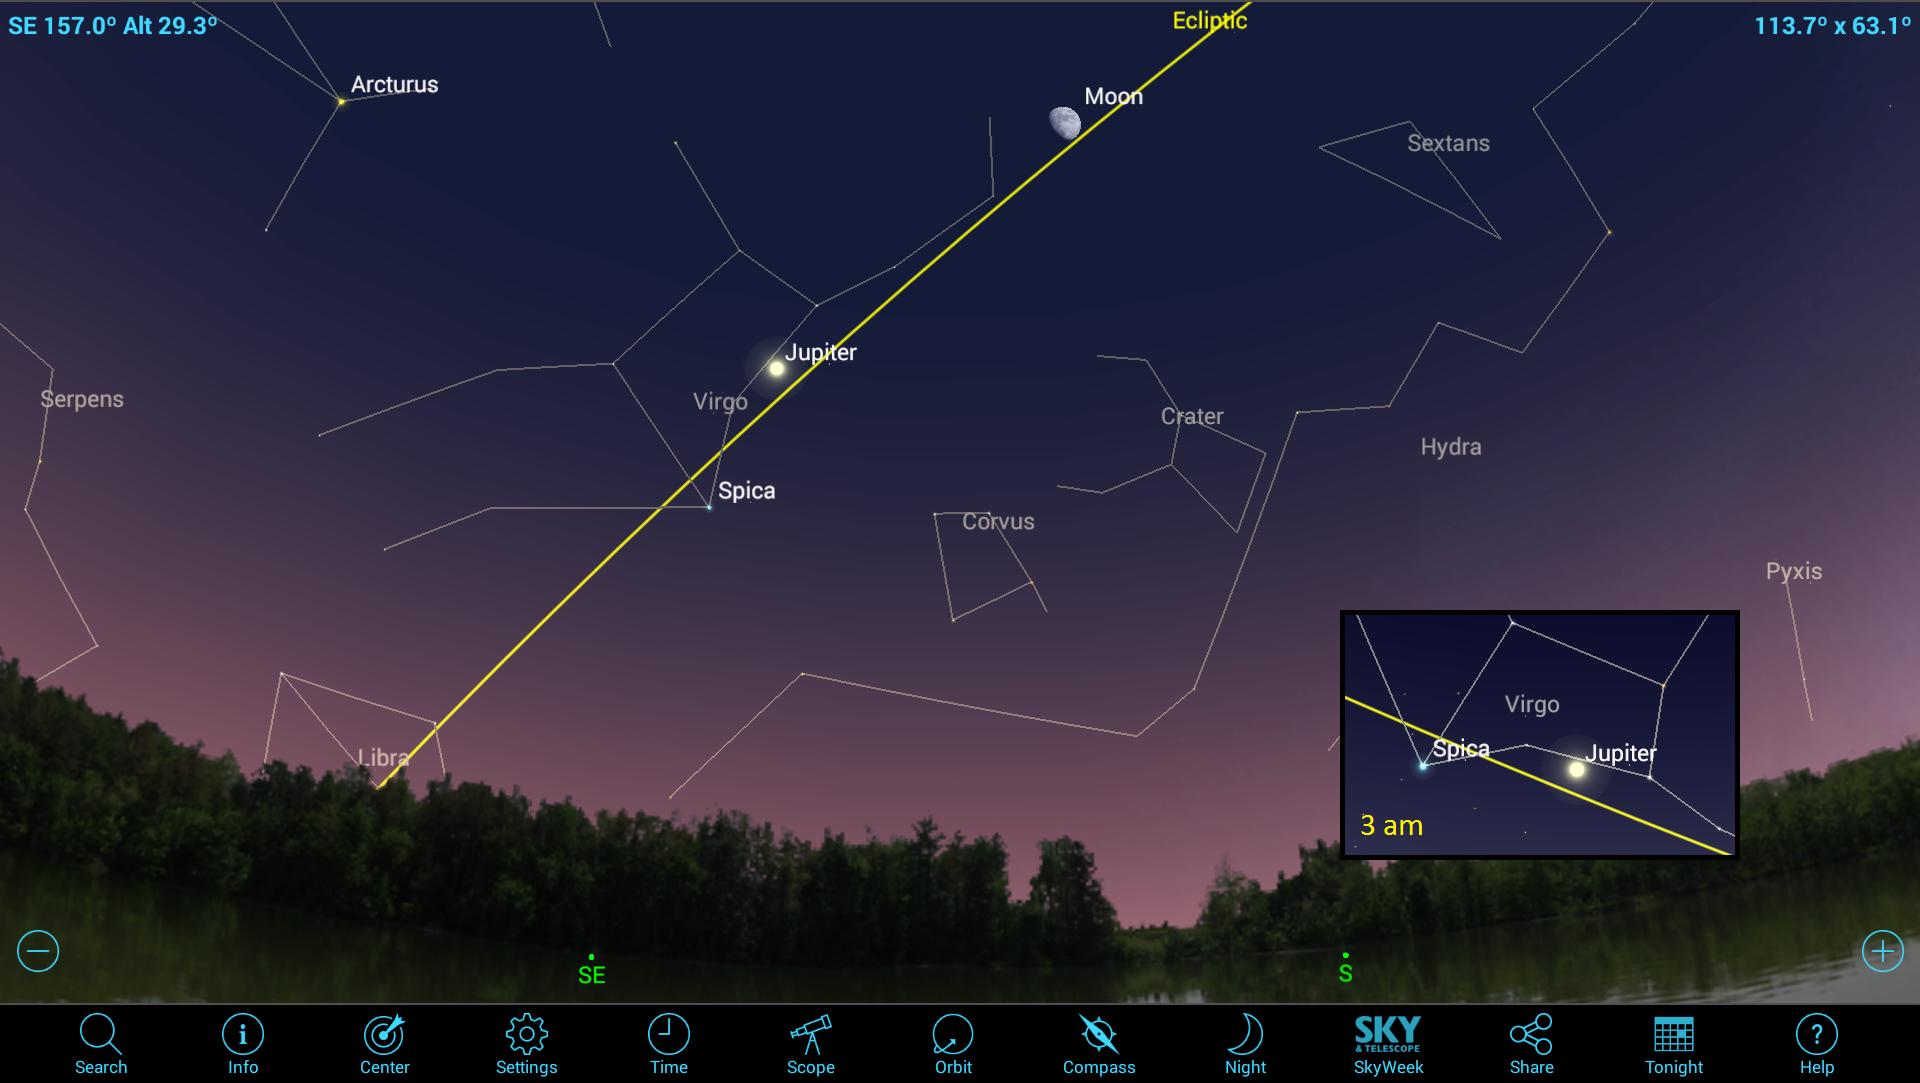 How to See Jupiter by Day and its Moons by Night using Mobile Astronomy